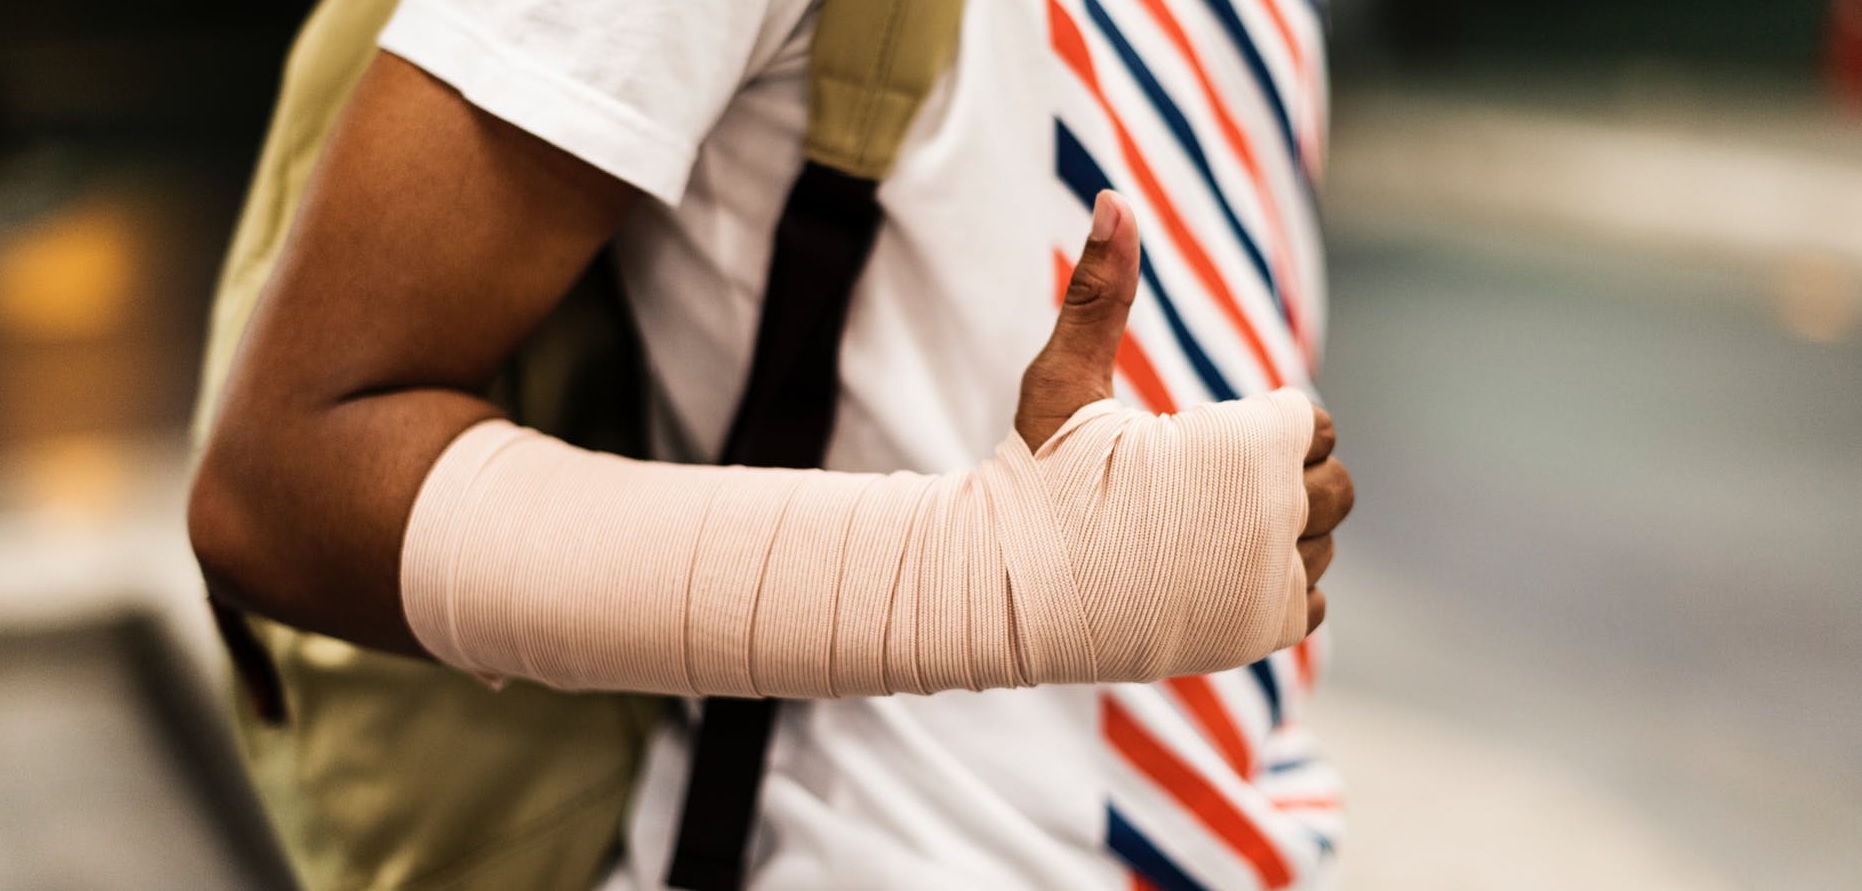 closeup of young person with arm in bandage